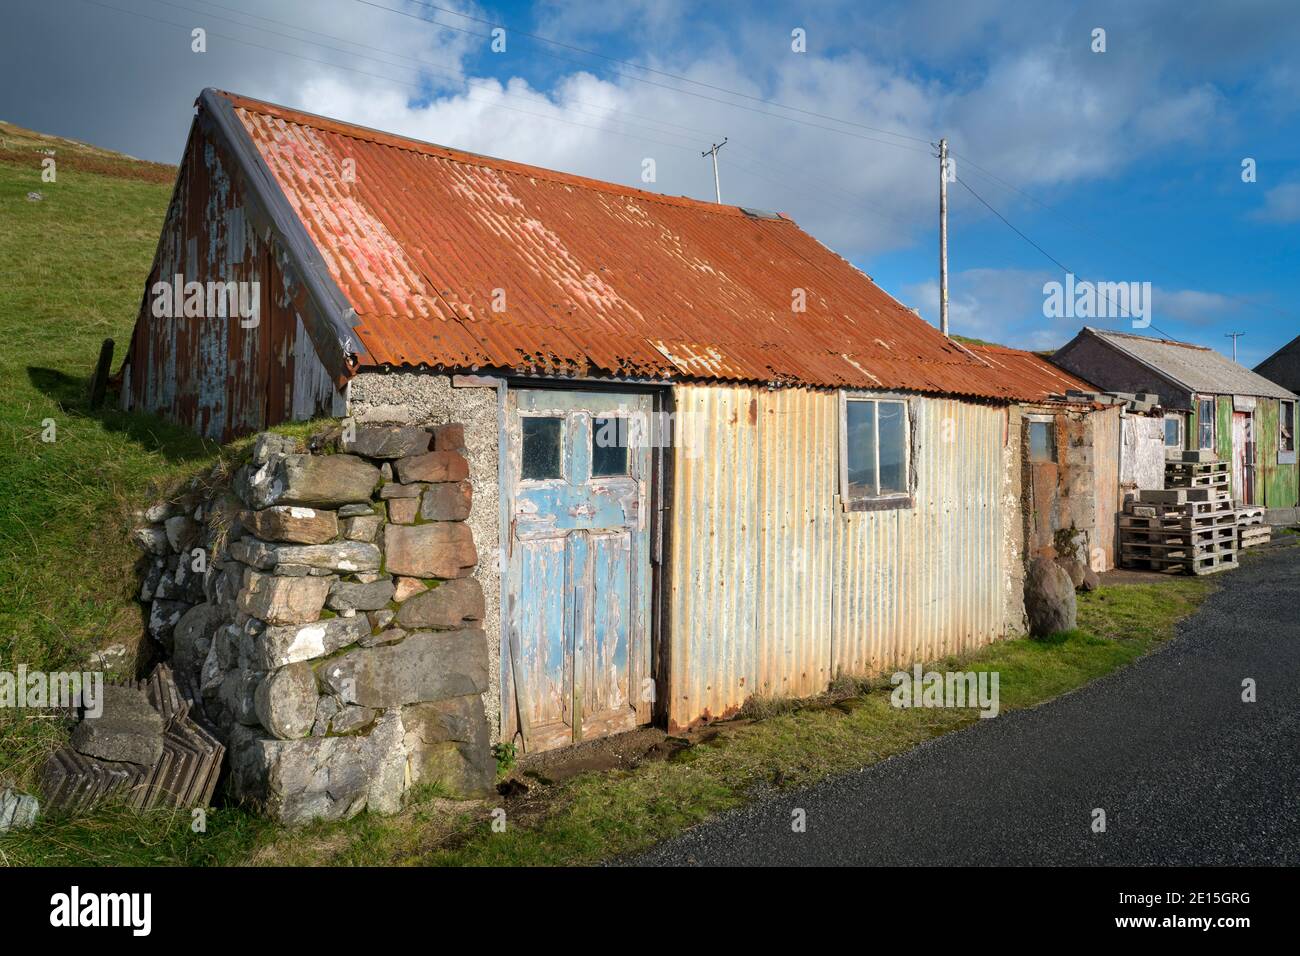 South Harris, Isle of Lewis and Harris, Scotland: Colorful old shed with a blue door Stock Photo